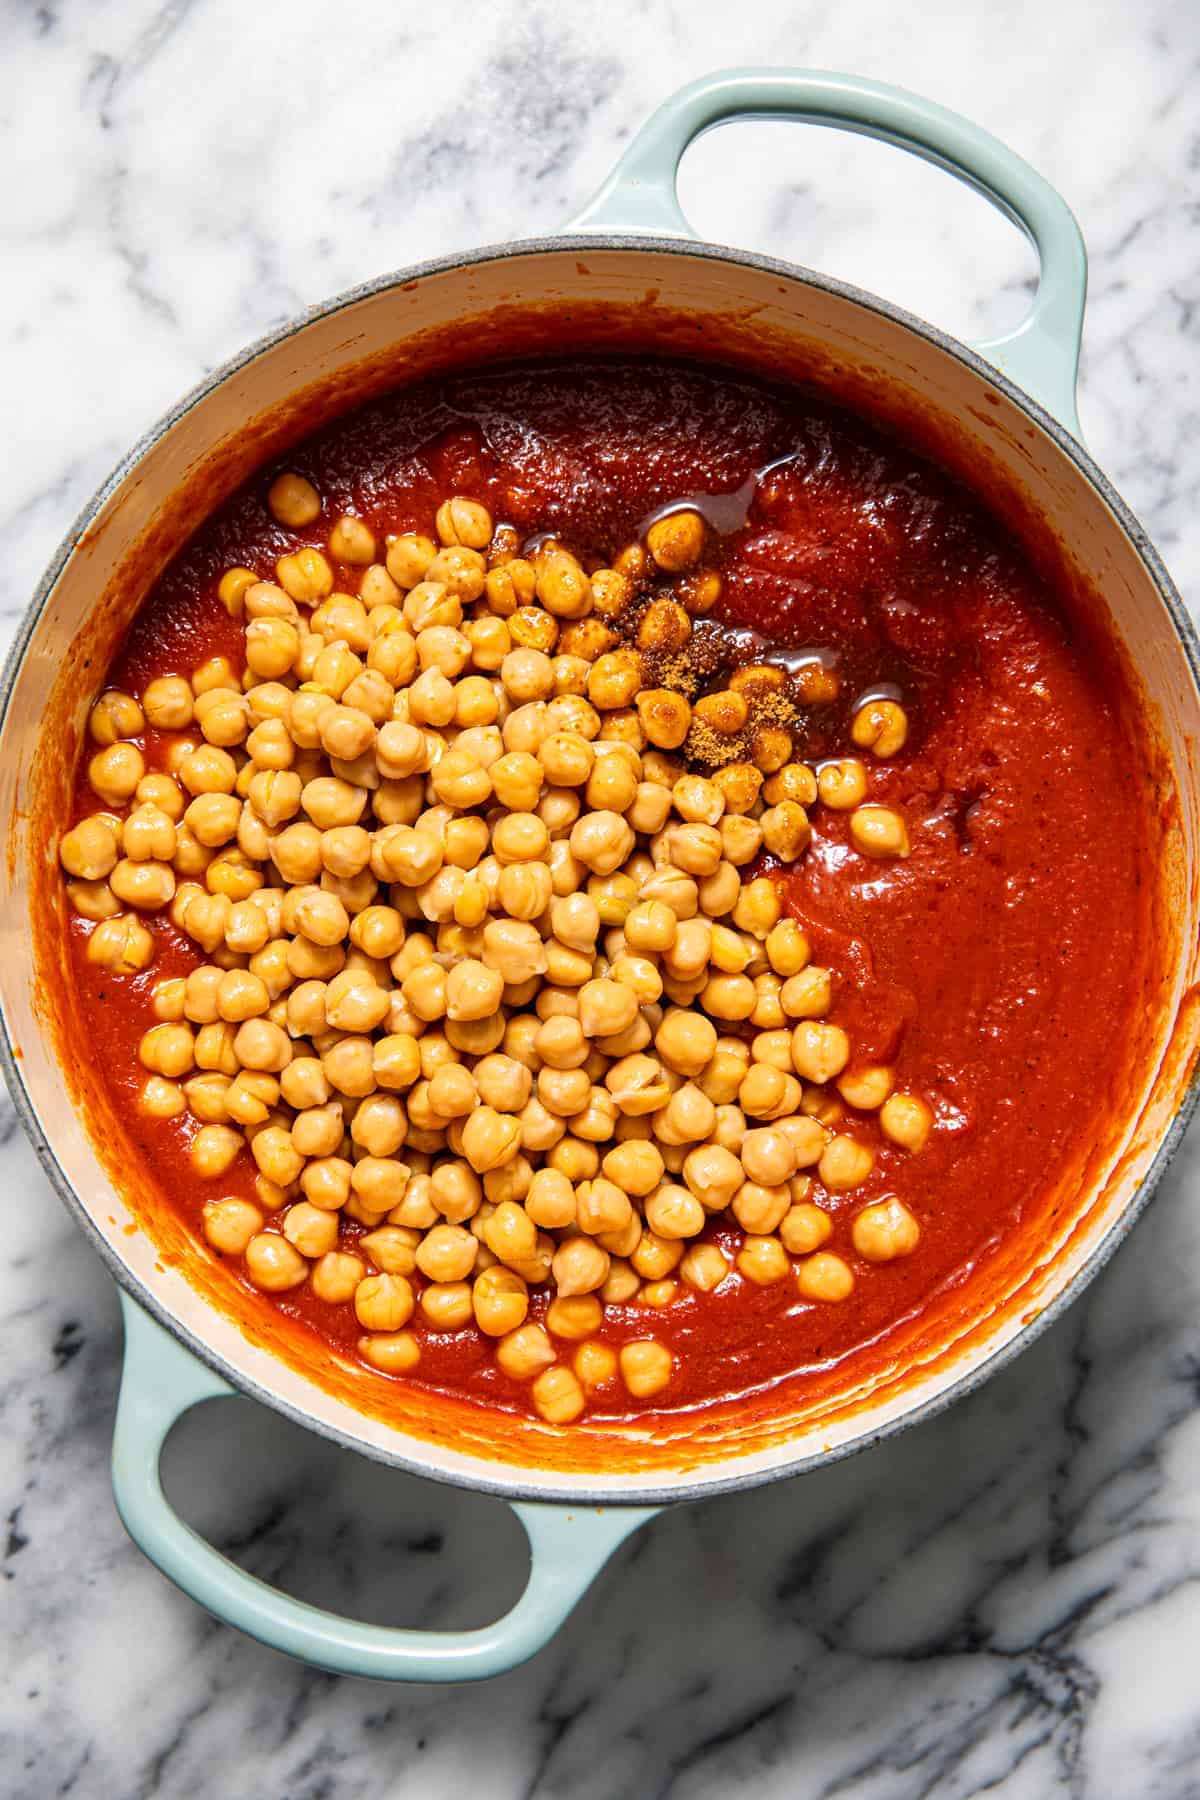 Chickpeas in a pan of tomato sauce.